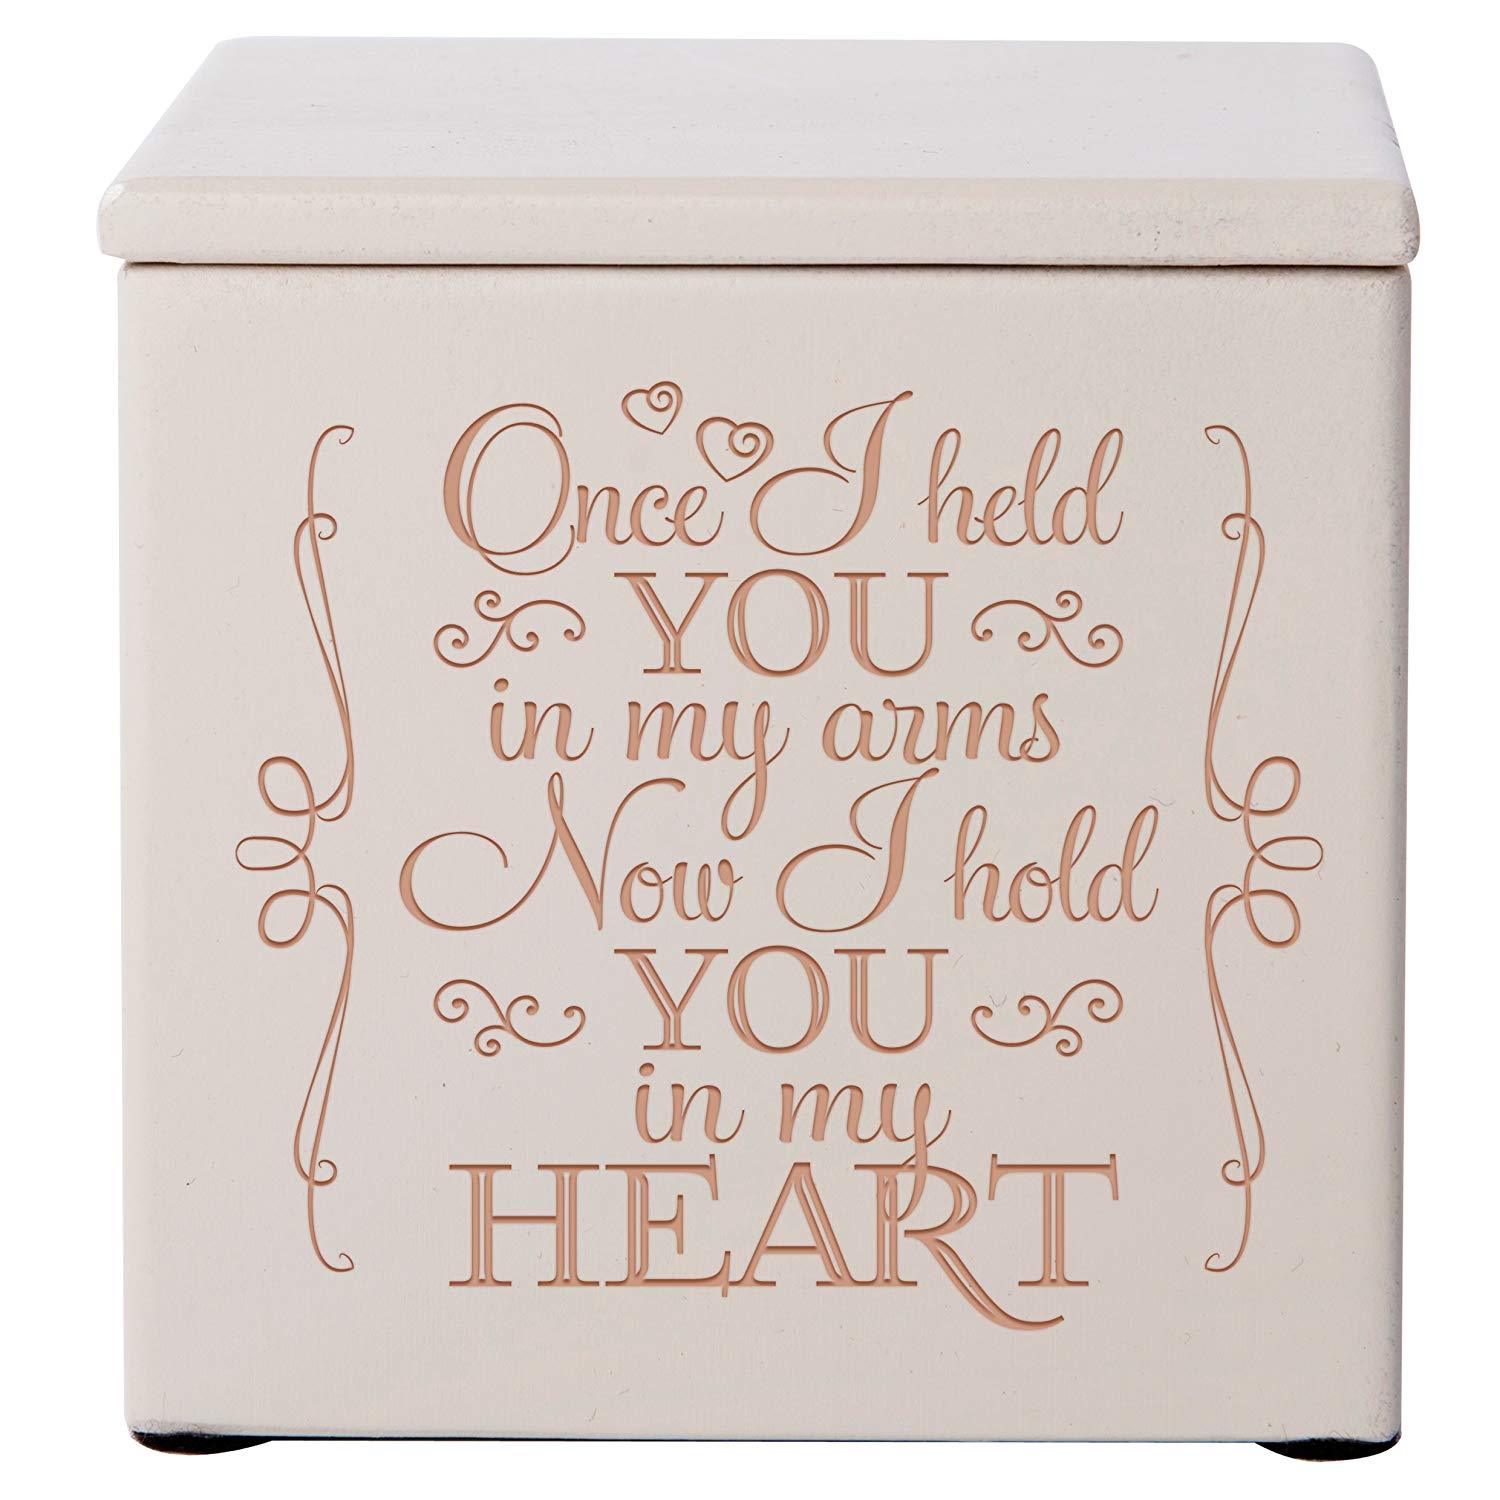 Wooden Cremation Urn for Human Ashes holds 17 cu in Once I Held You In My Arms